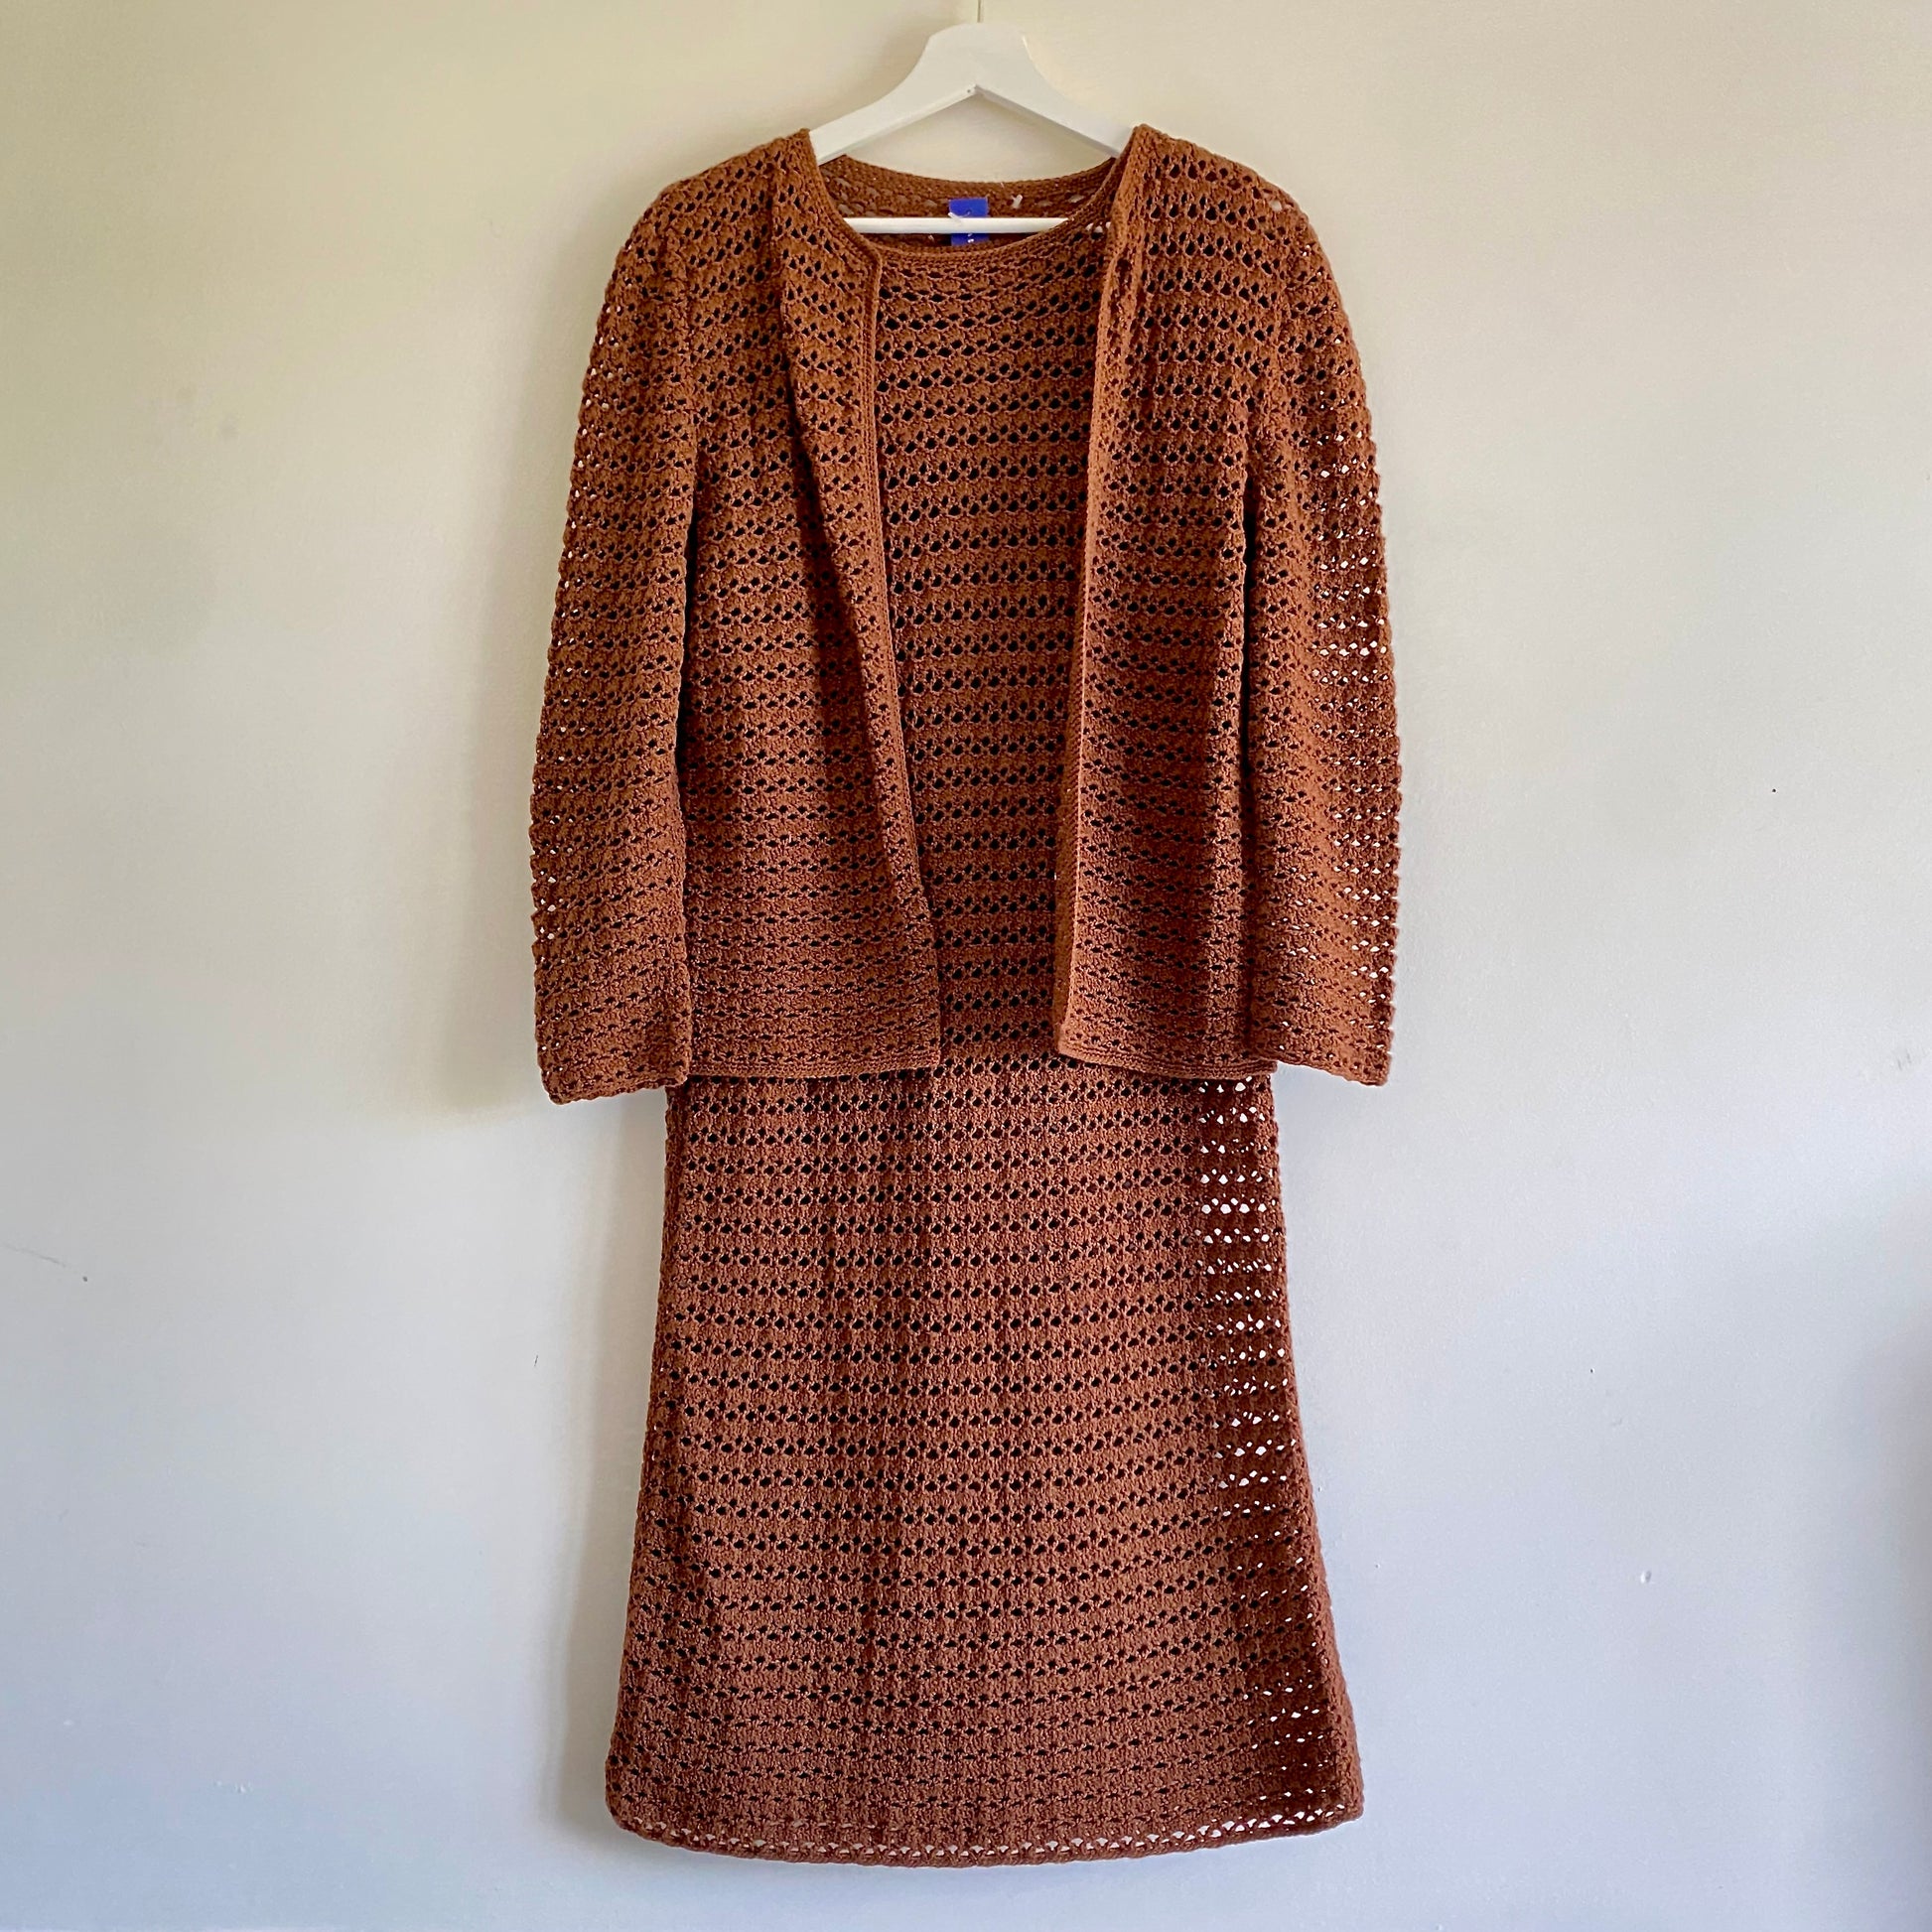 Hand crocheted brown dress suit Absolutely stunning set, we believe to be from the late 60s Shift style sleeveless dress with tie belt Edge to edge long sleeved cardigan/jacket